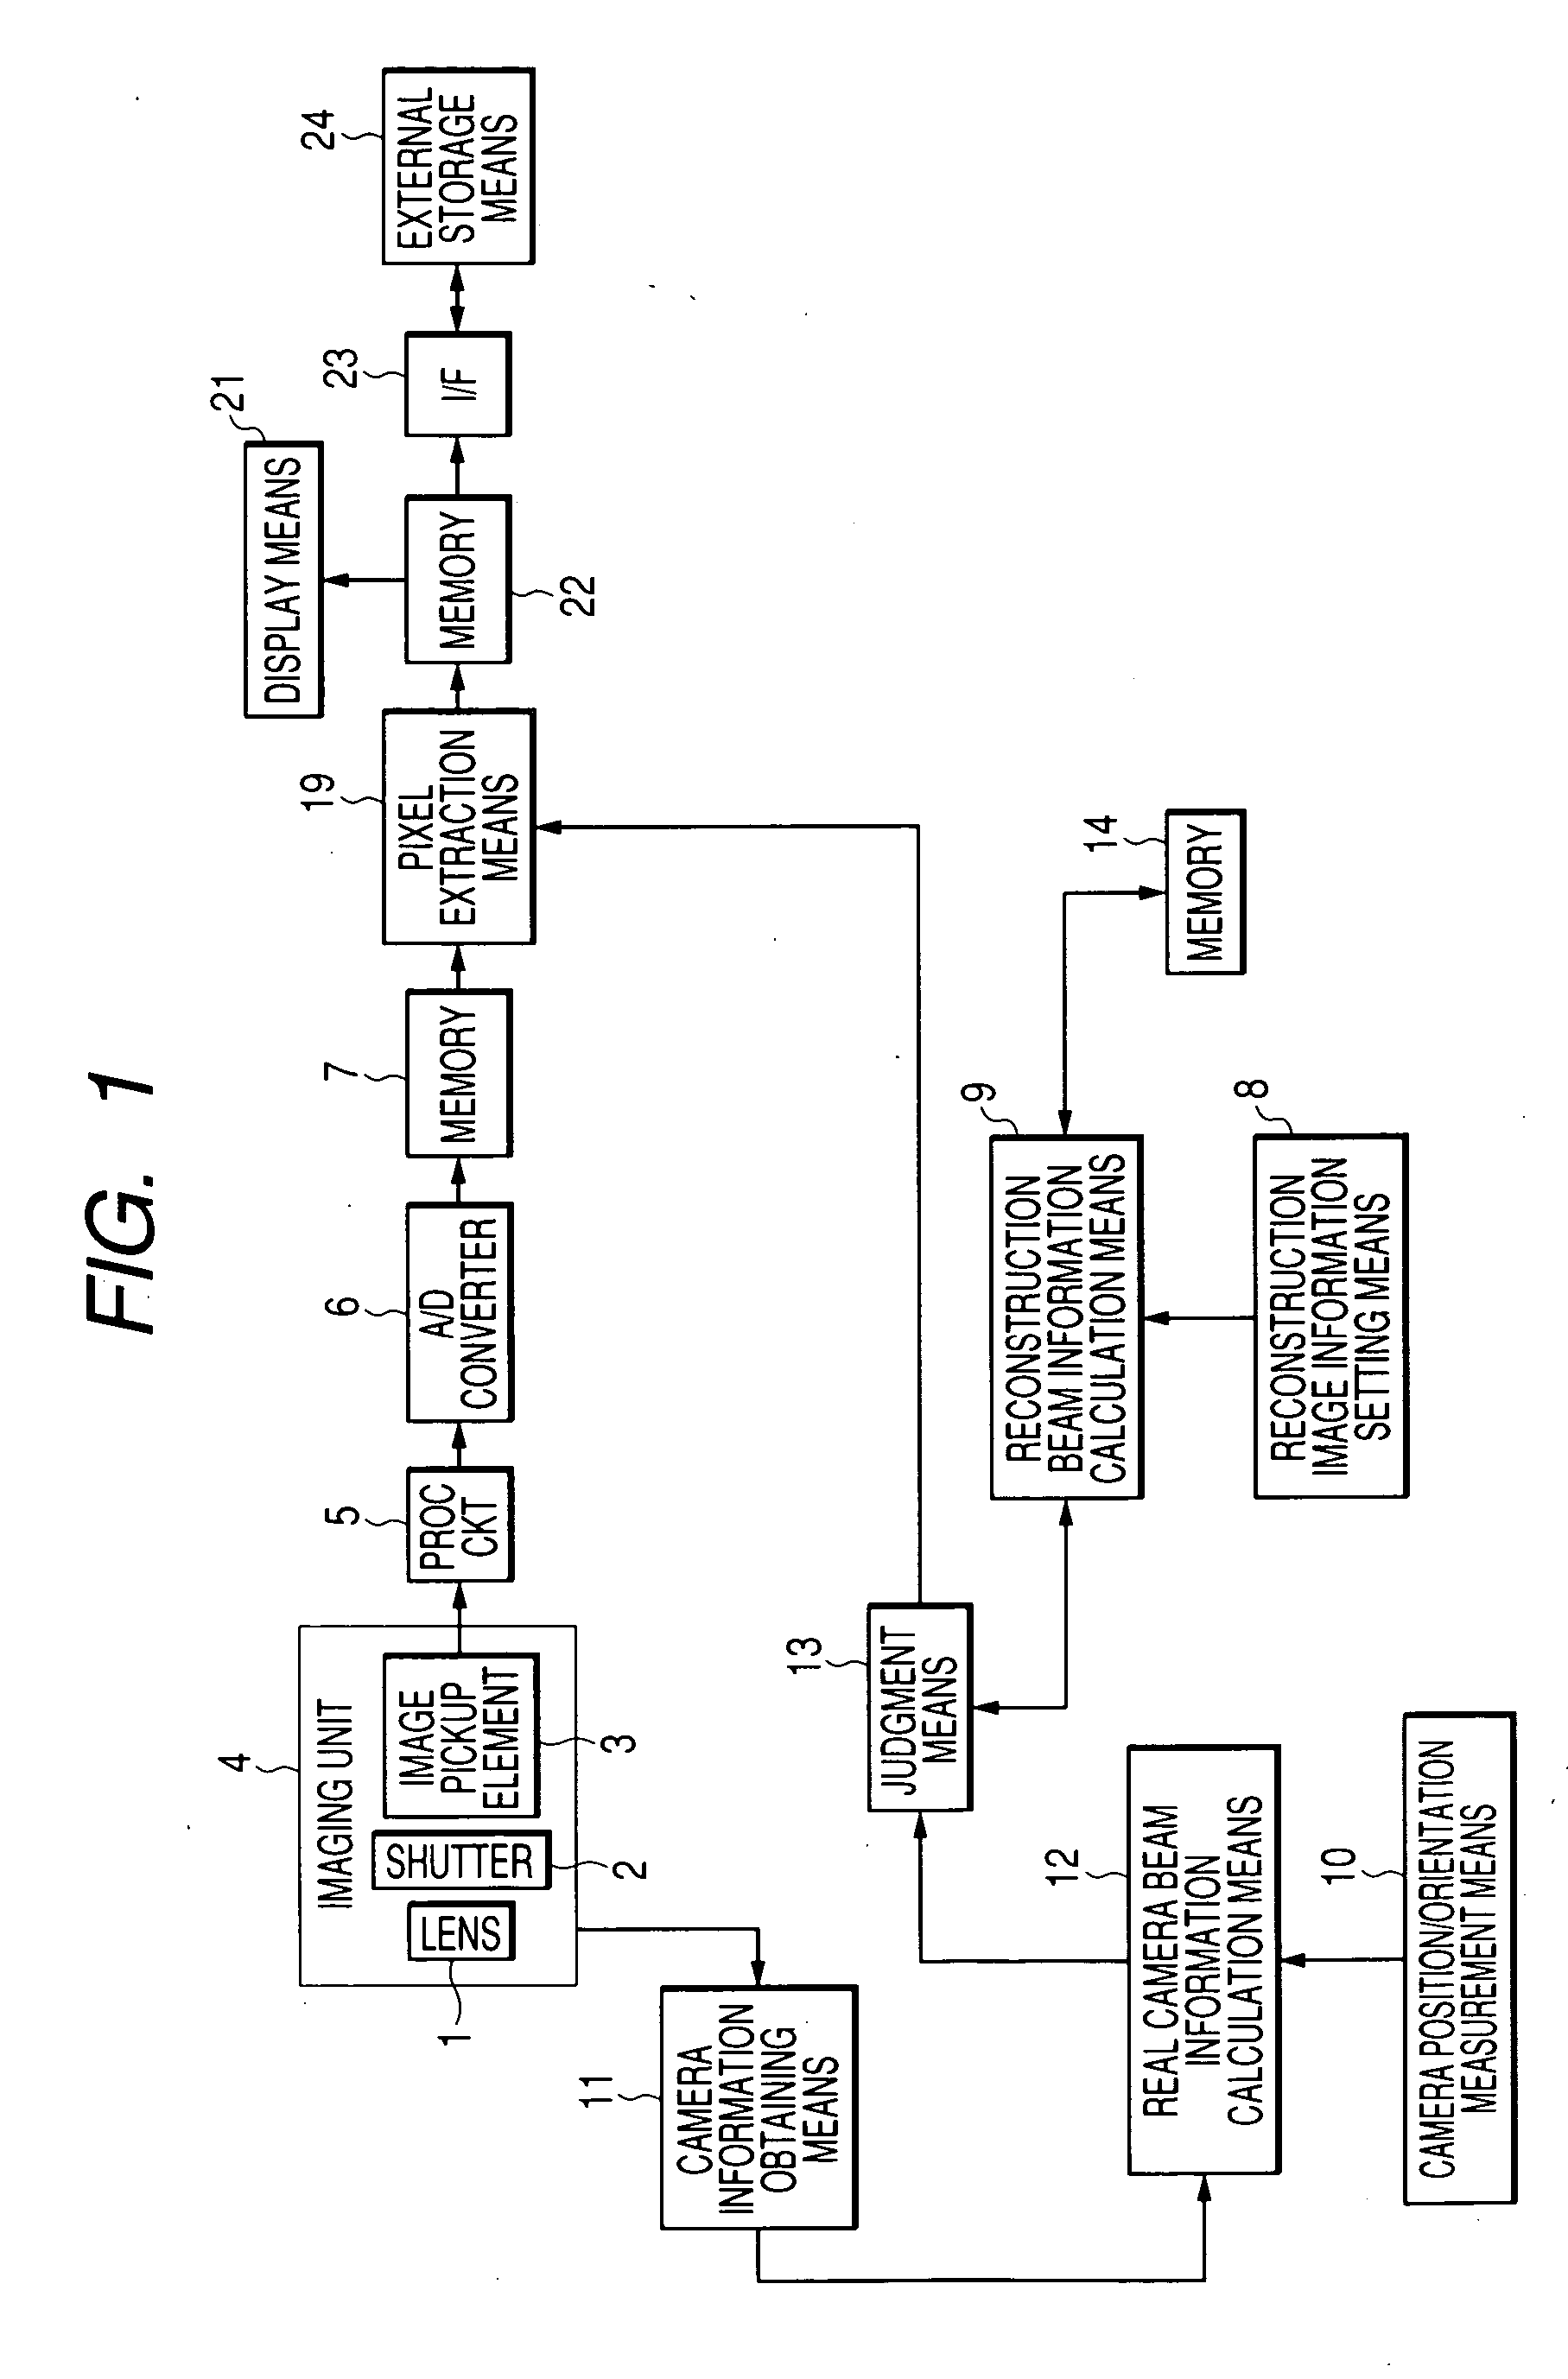 Image photographing apparatus and image processing method